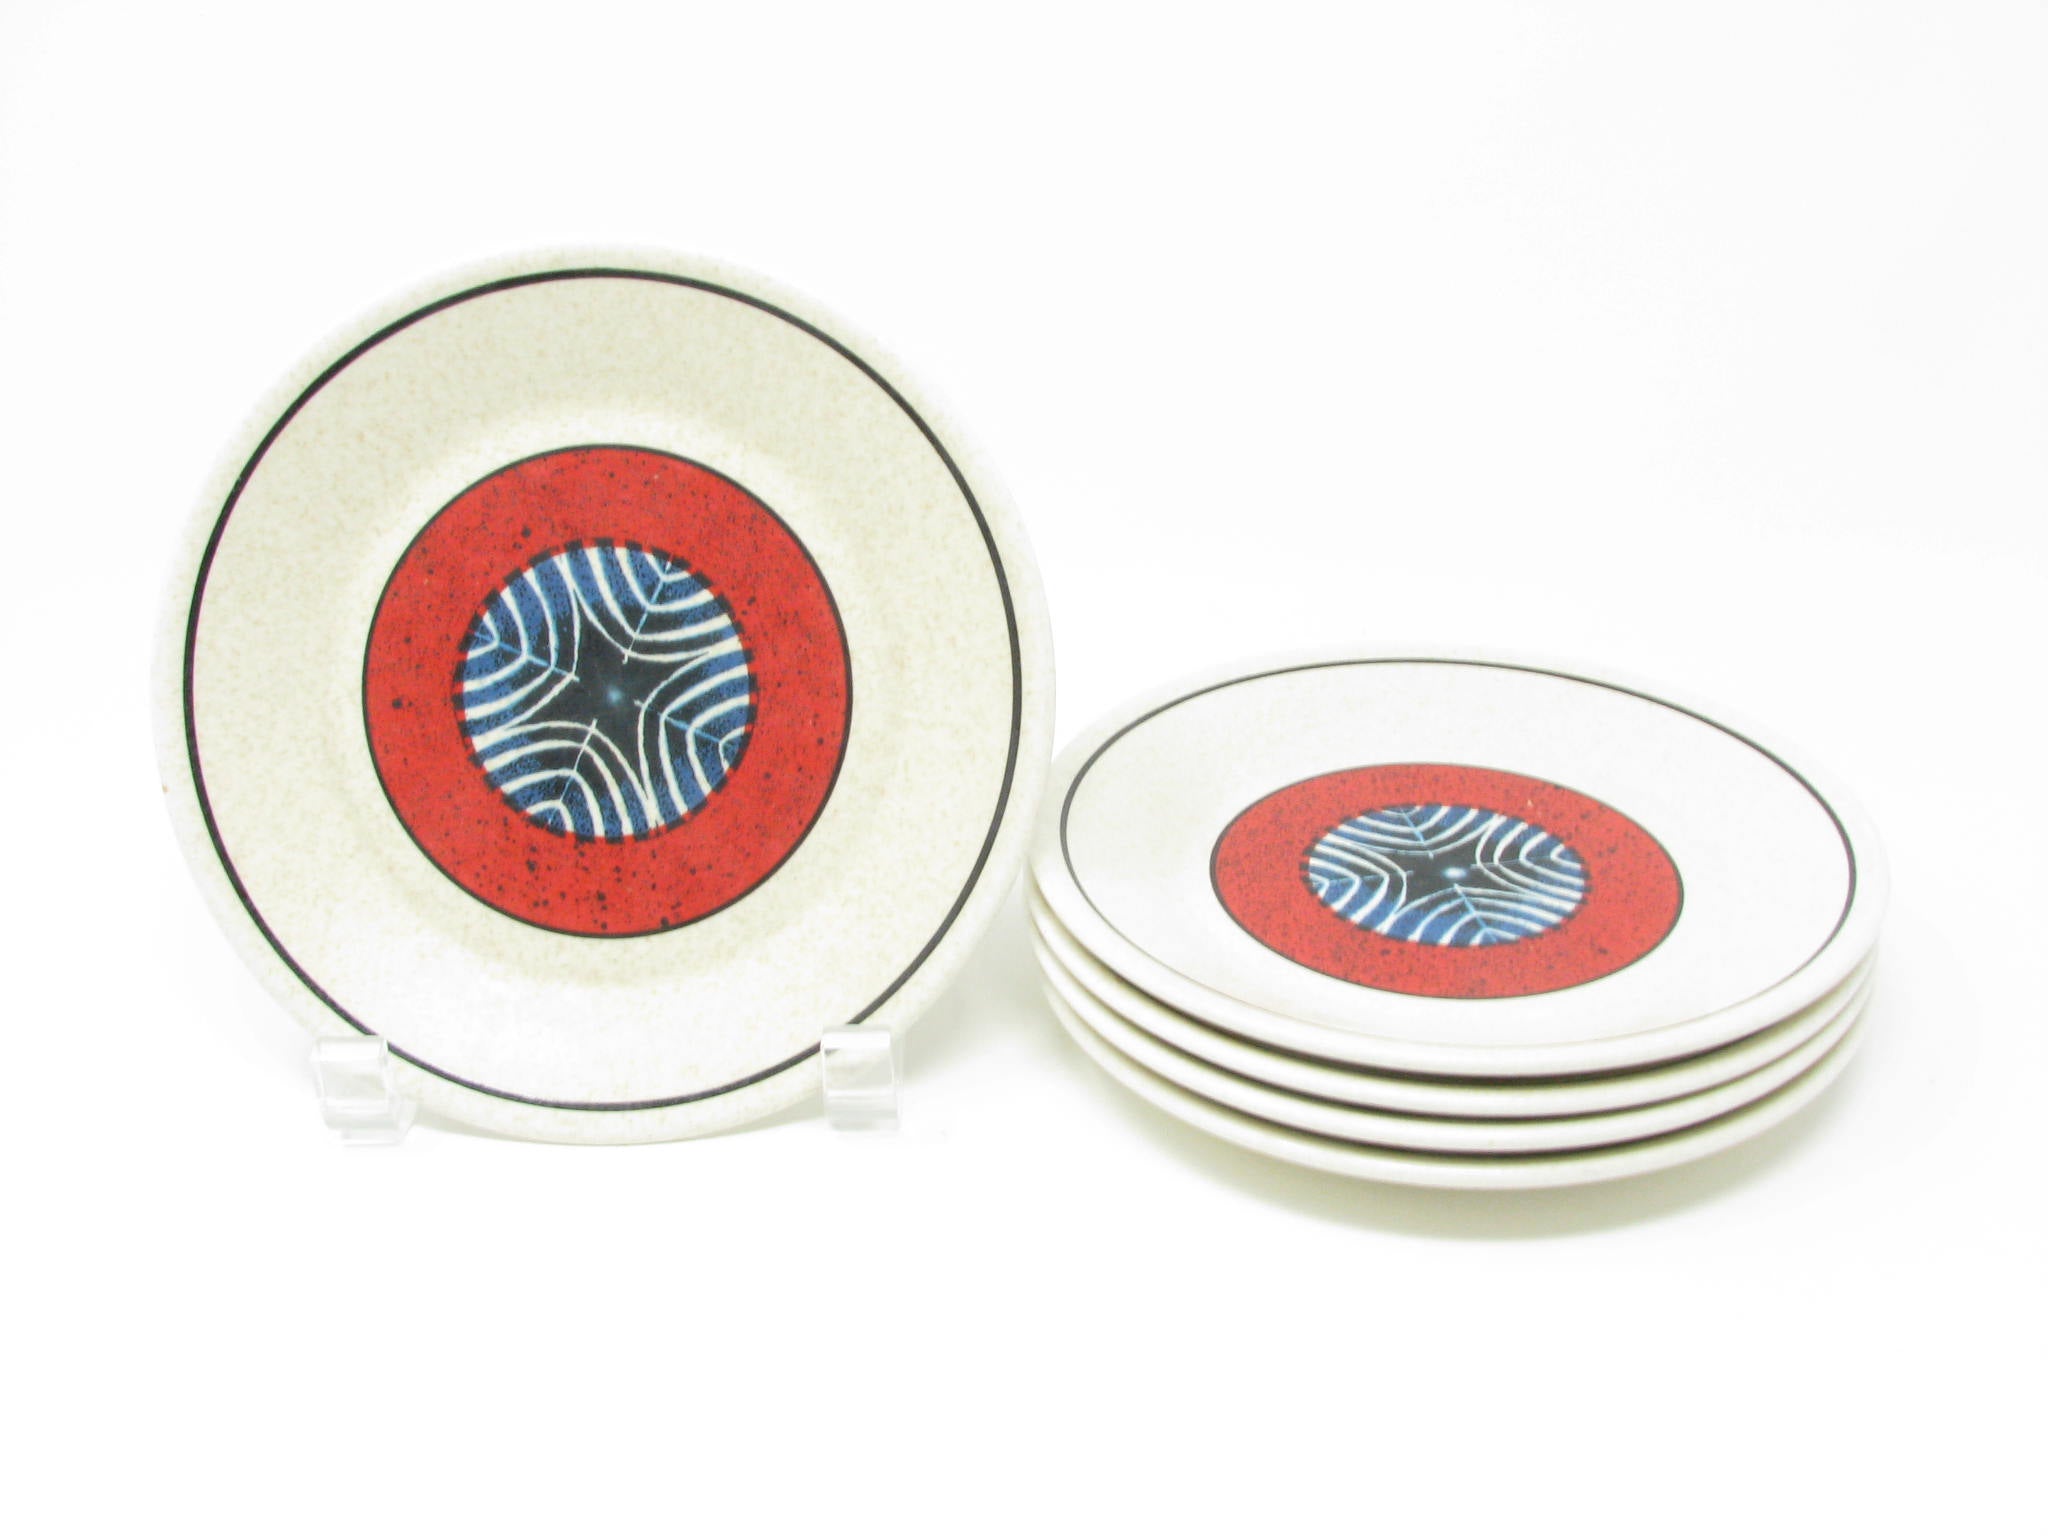 edgebrookhouse - Vintage Lenox Staccato Red and Blue Bread Dessert Plates - Set of 5